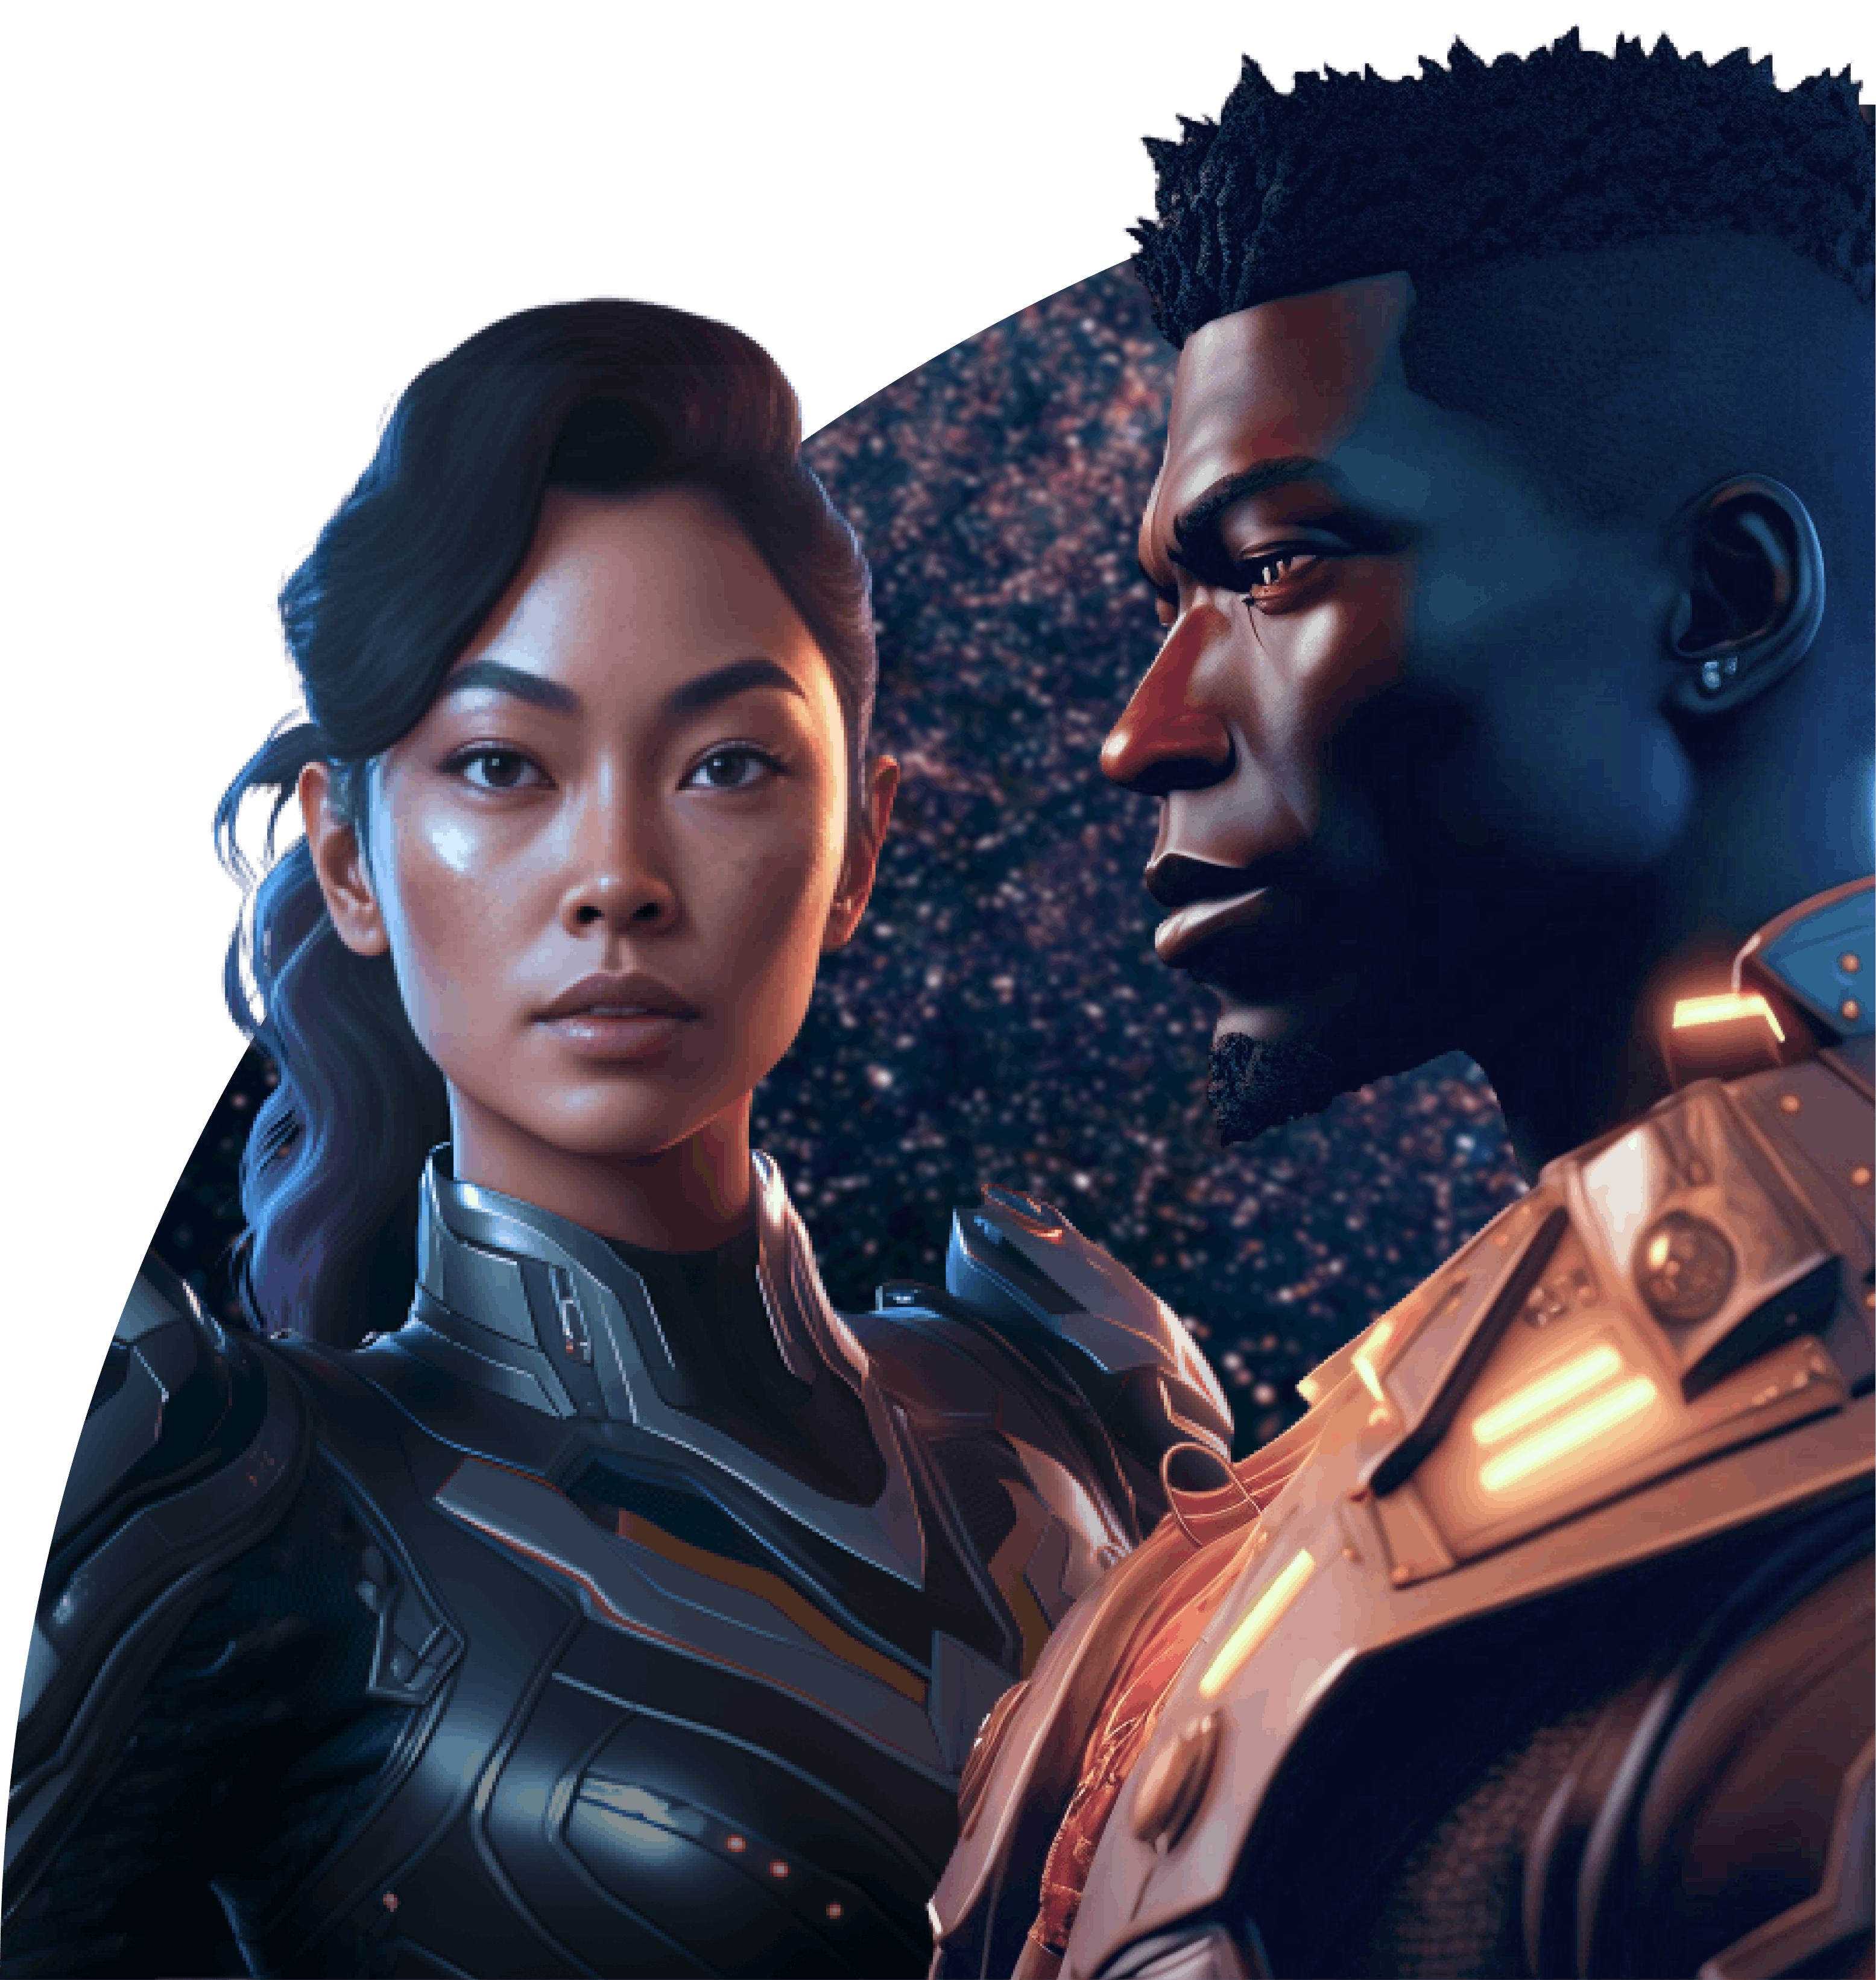 On a starry background there's an Asian futuristic looking NPC spacewoman and a black space captain NPC in profile with a brown jacket. 